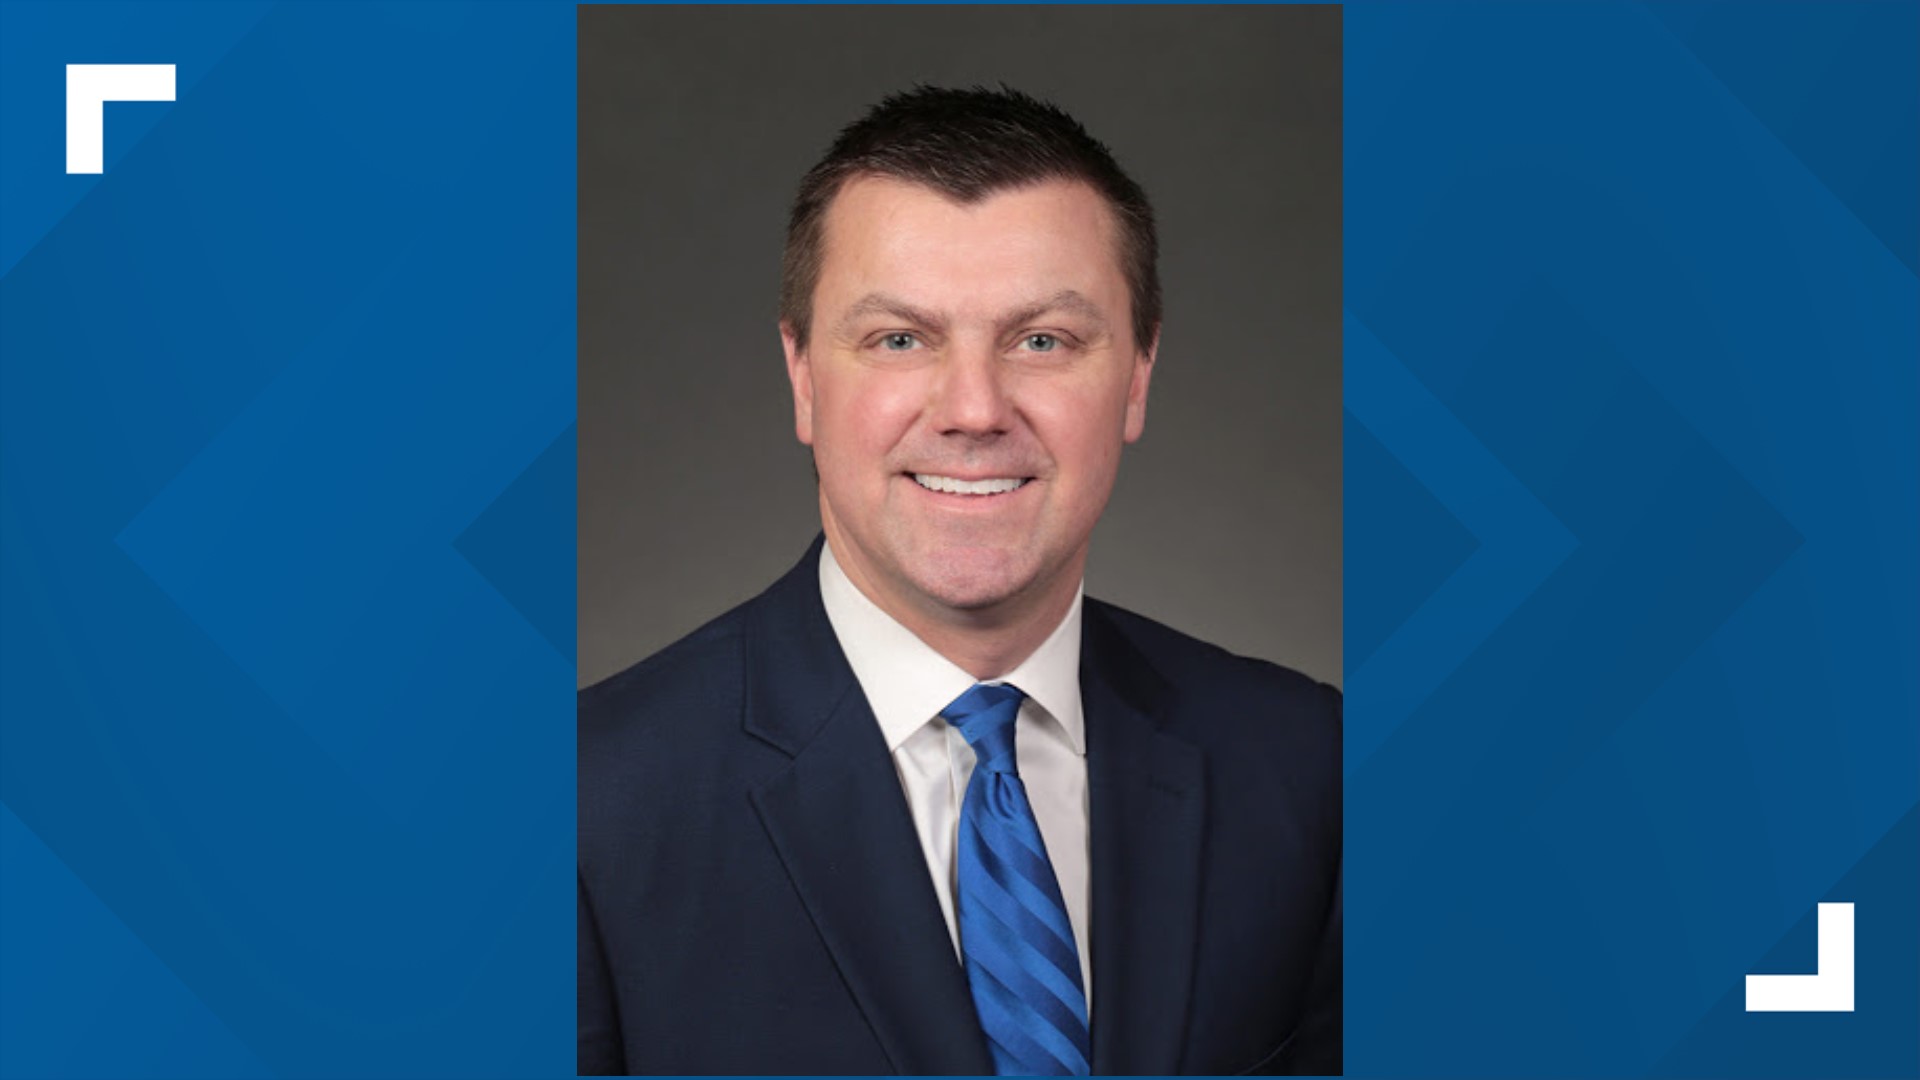 Whitver plans to remain in the Iowa Senate as Majority Leader during his treatment.